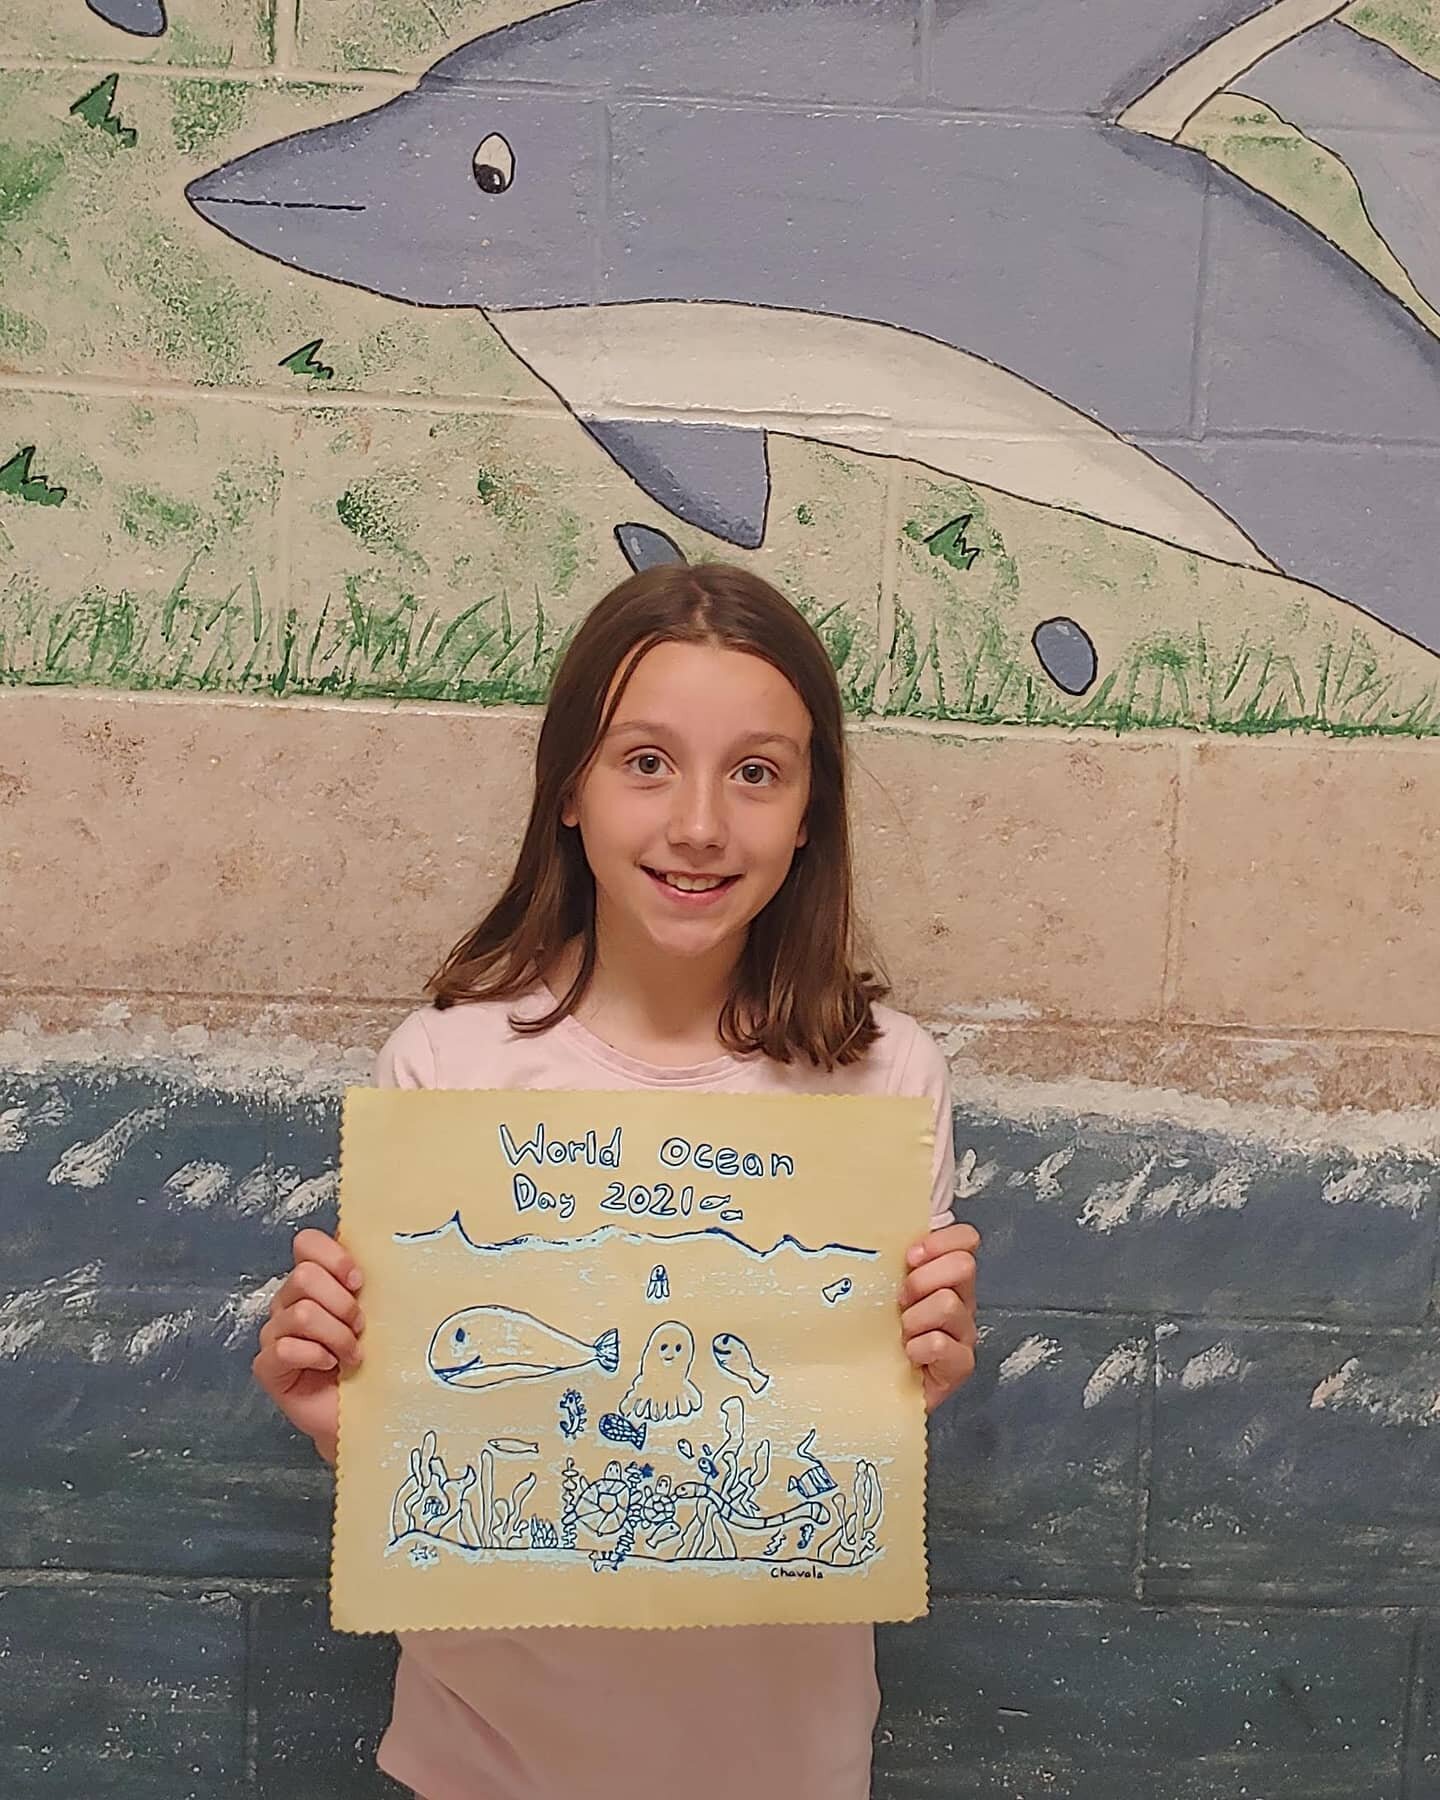 Happy World Oceans Day!

We're excited to finally announce the winner of the World Oceans Day drawing contest-  Chavala Wilkins from Mrs Warman's grade 4 class at Sussex Elememtary!

Earlier in April we announced a drawing contest with the school,  i